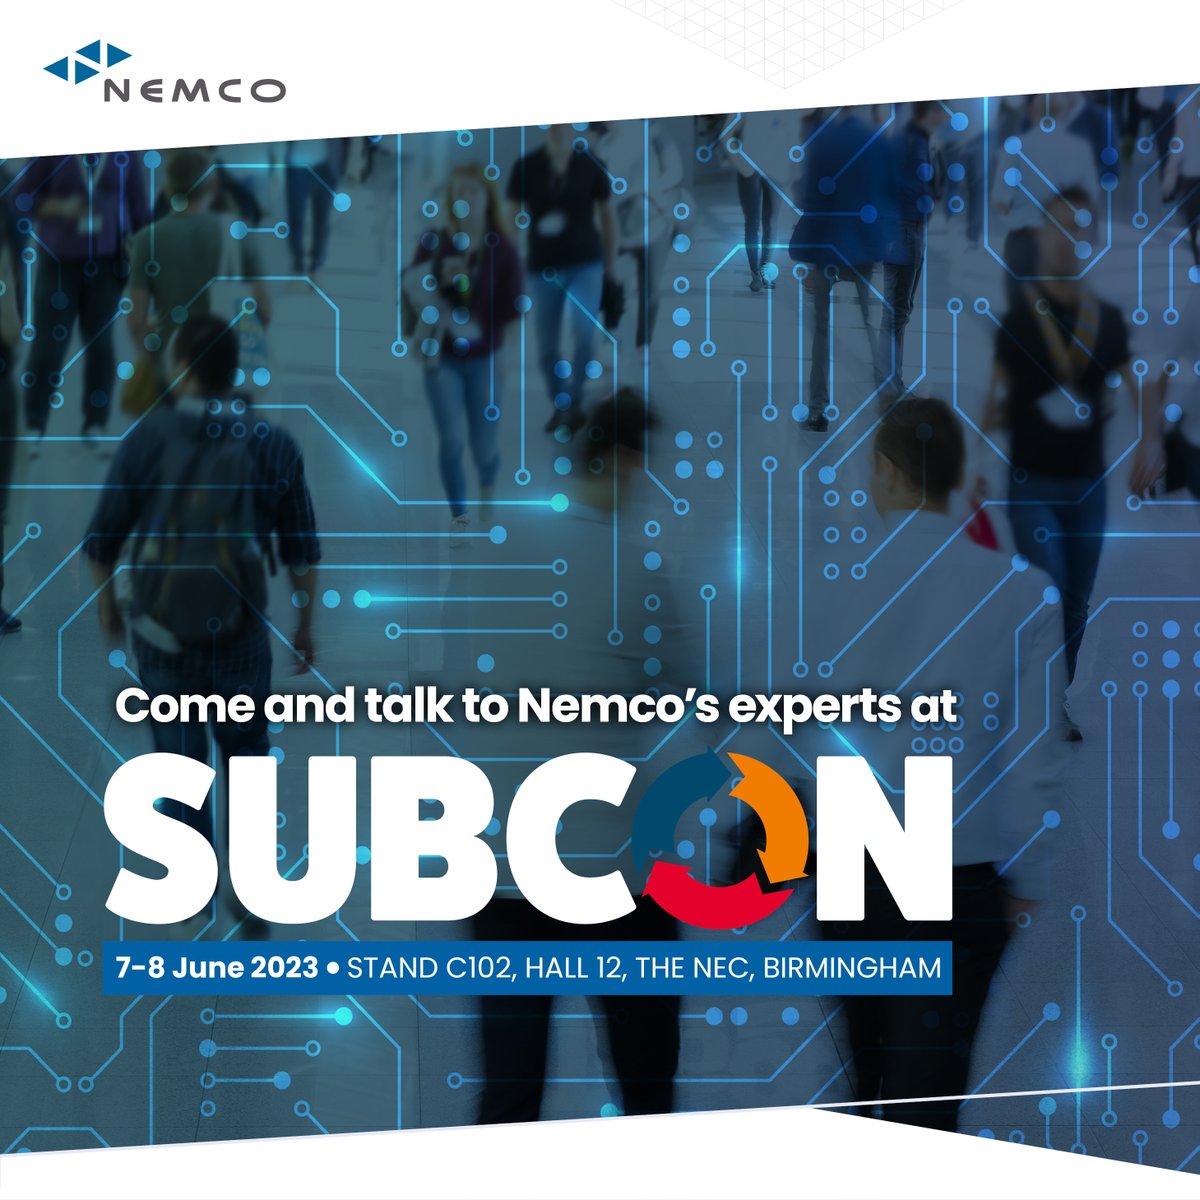 Subcon is a must attend event for any manufacturing and engineering professional. Nemco is delighted to be attending on 7-8th June and will be exhibiting on Stand C102.

Learn more in our @SubconShow blog: ecs.page.link/MMfb3

#subcon #subcon2023 #contractmanufacturing #NEC